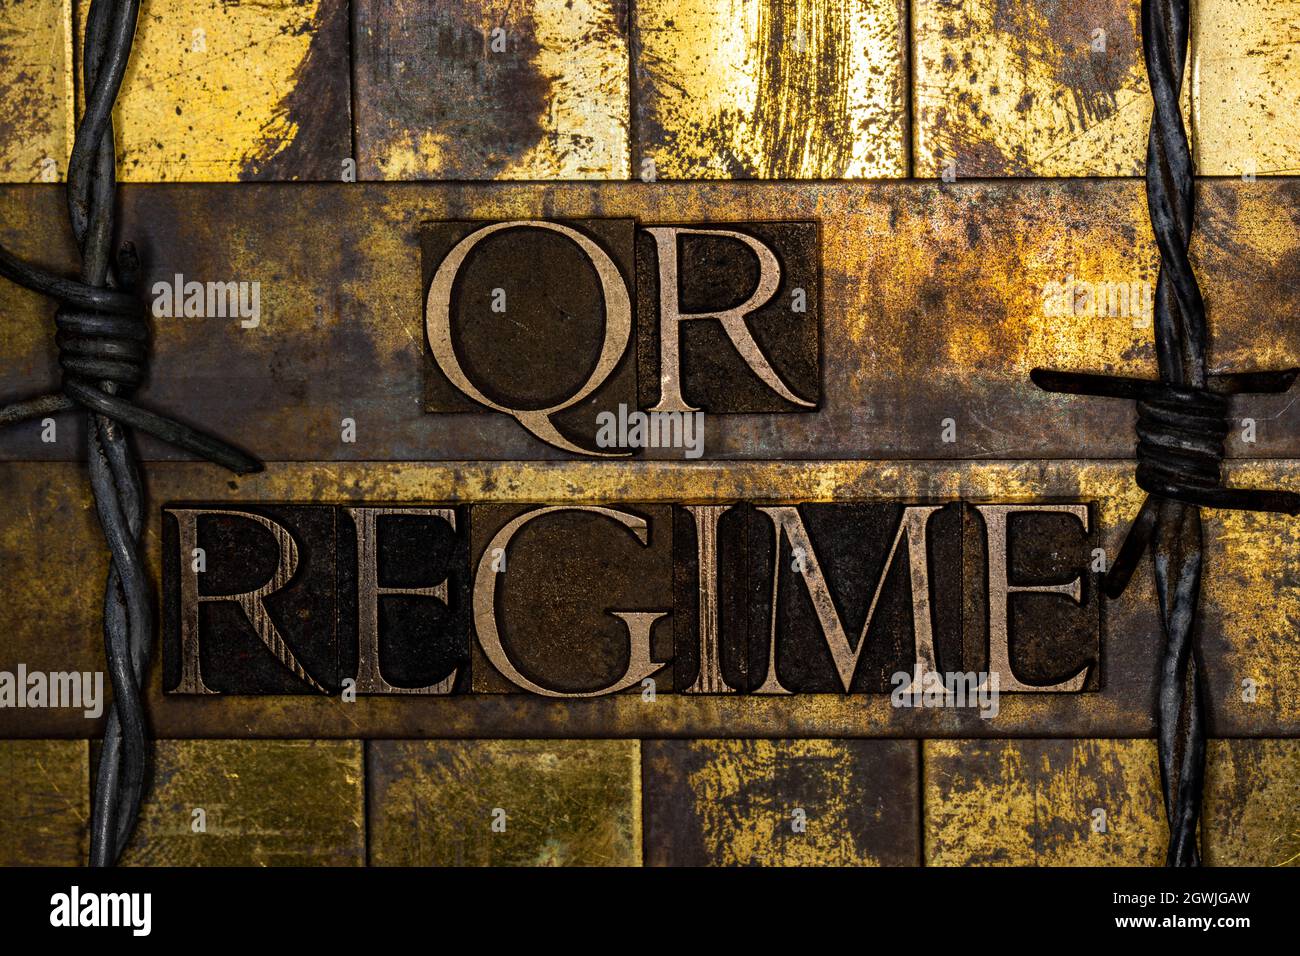 QR Regime text on textured grunge copper and vintage gold background Stock Photo